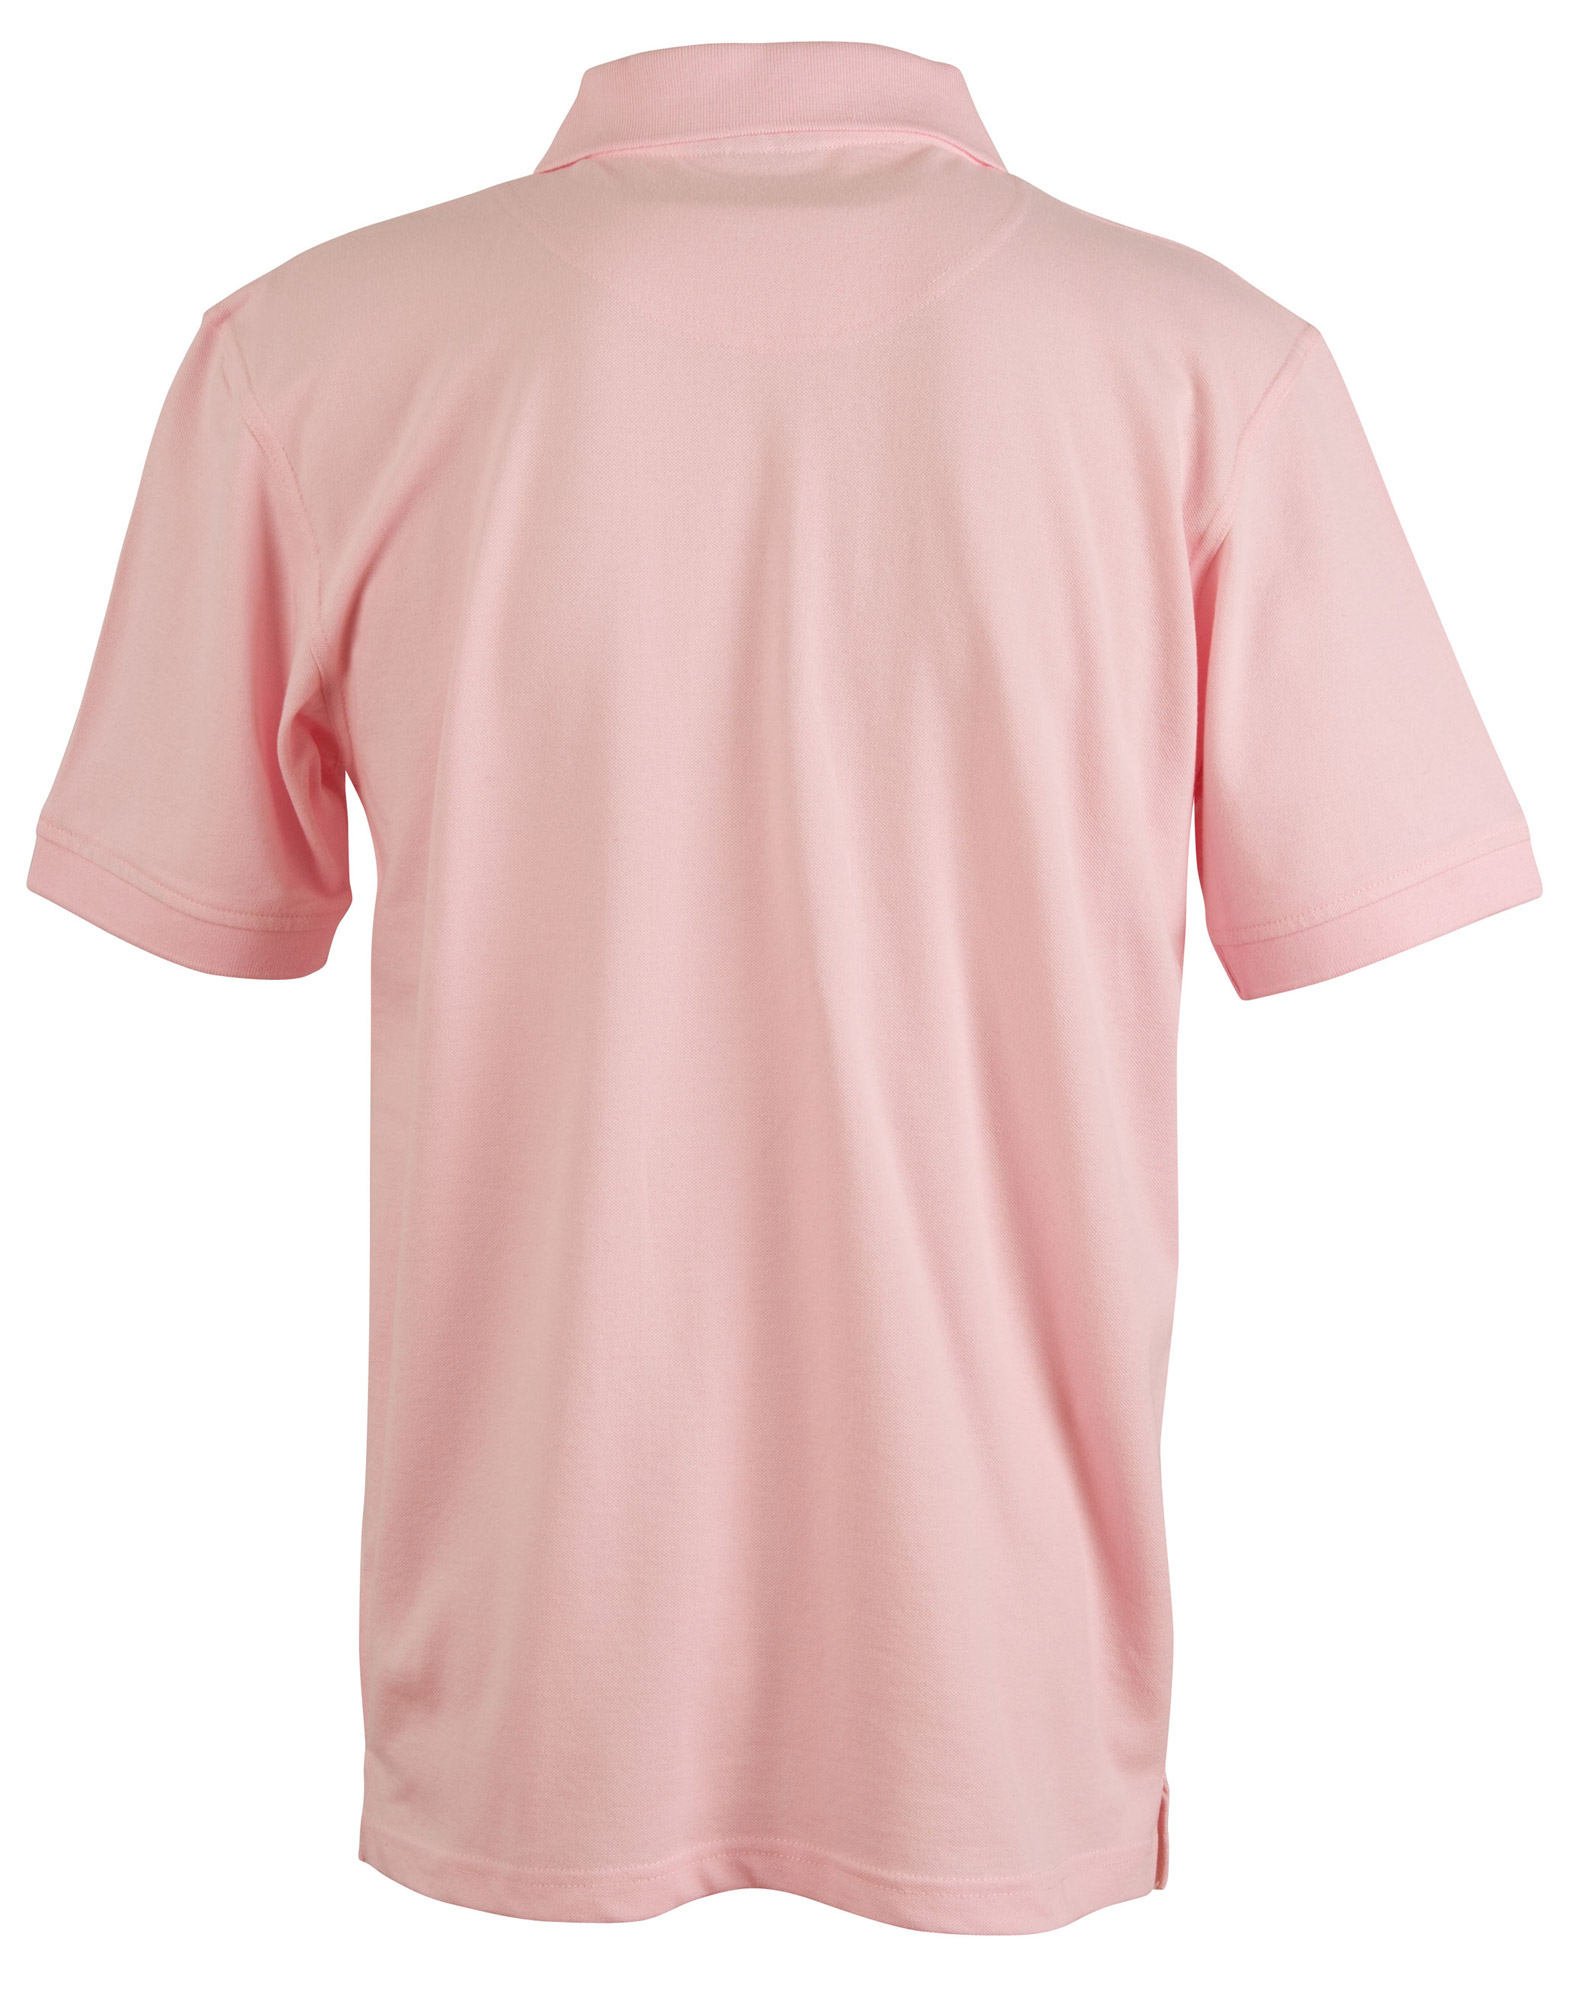 Custom Mens Pink Darling Harbour Cotton Stretch Polo Shirts Online Perth Australia